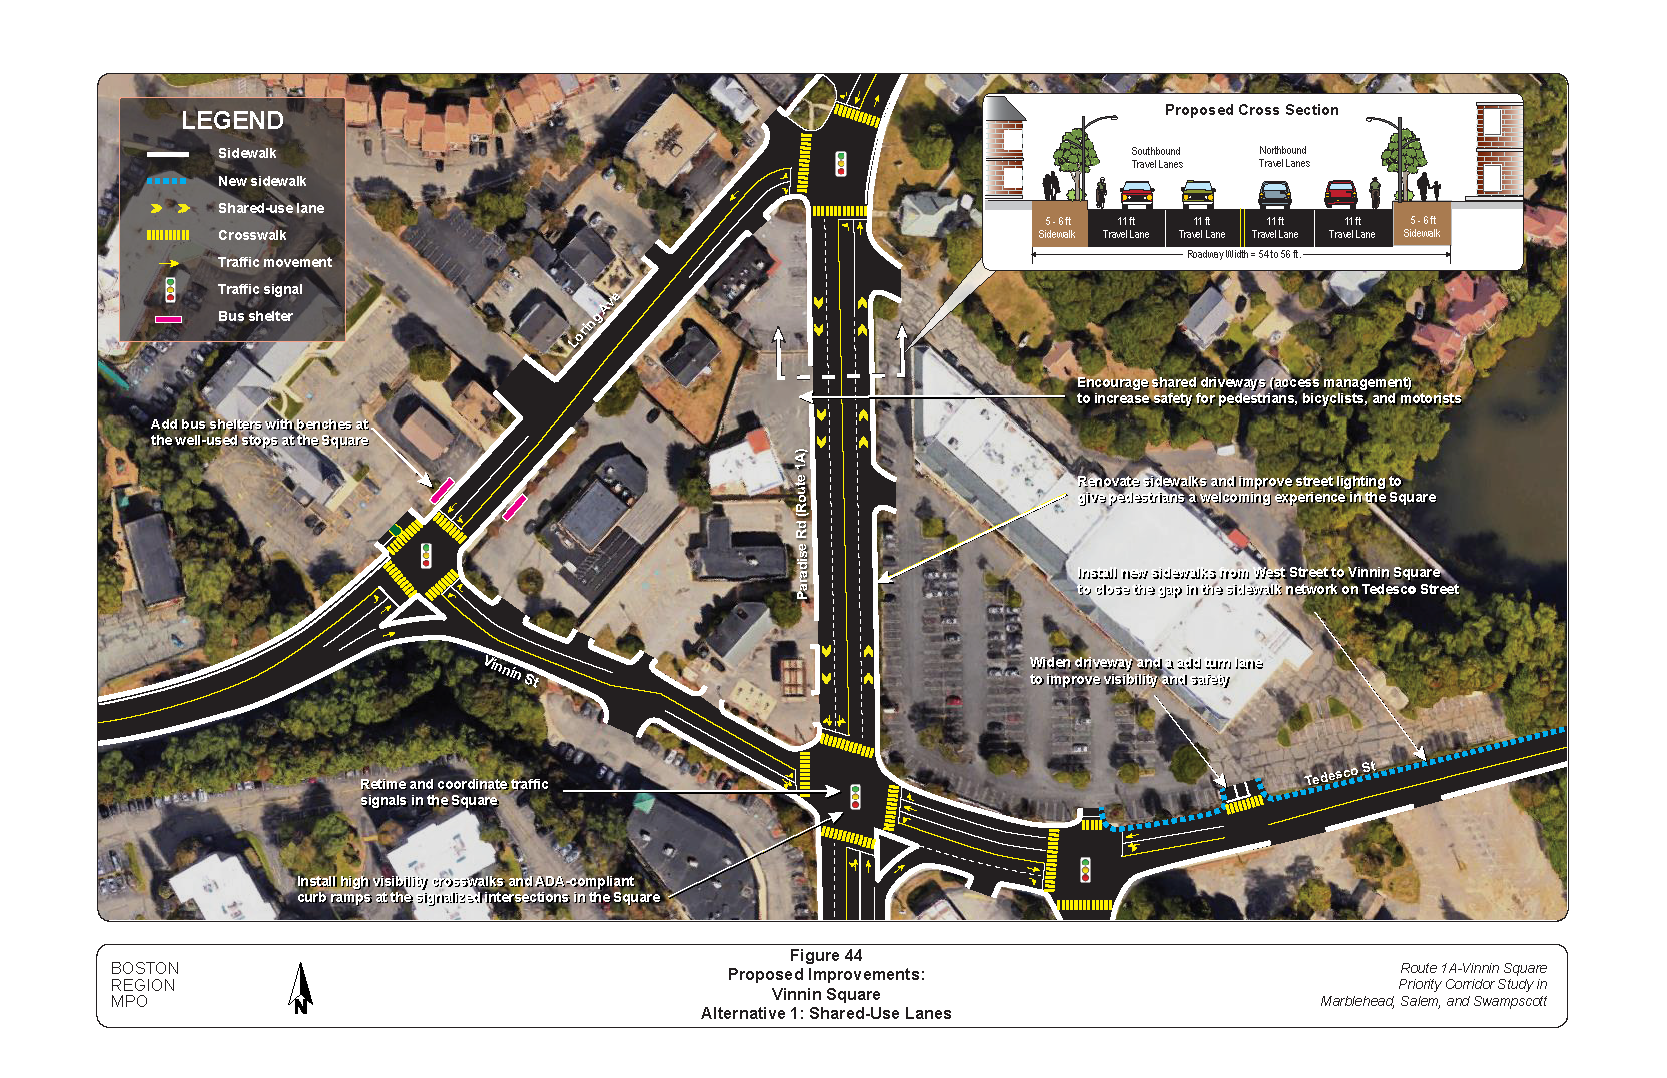 FIGURE 44. Proposed Improvements, Alternative 1: Vinnin Square, Shared-Use Lanes.Figure 44 is a map of Vinnin Square showing the location of proposed improvements in Alternative 1. The proposed improvements are described in text boxes. Graphics embedded show proposed roadway cross sections with lane widths.